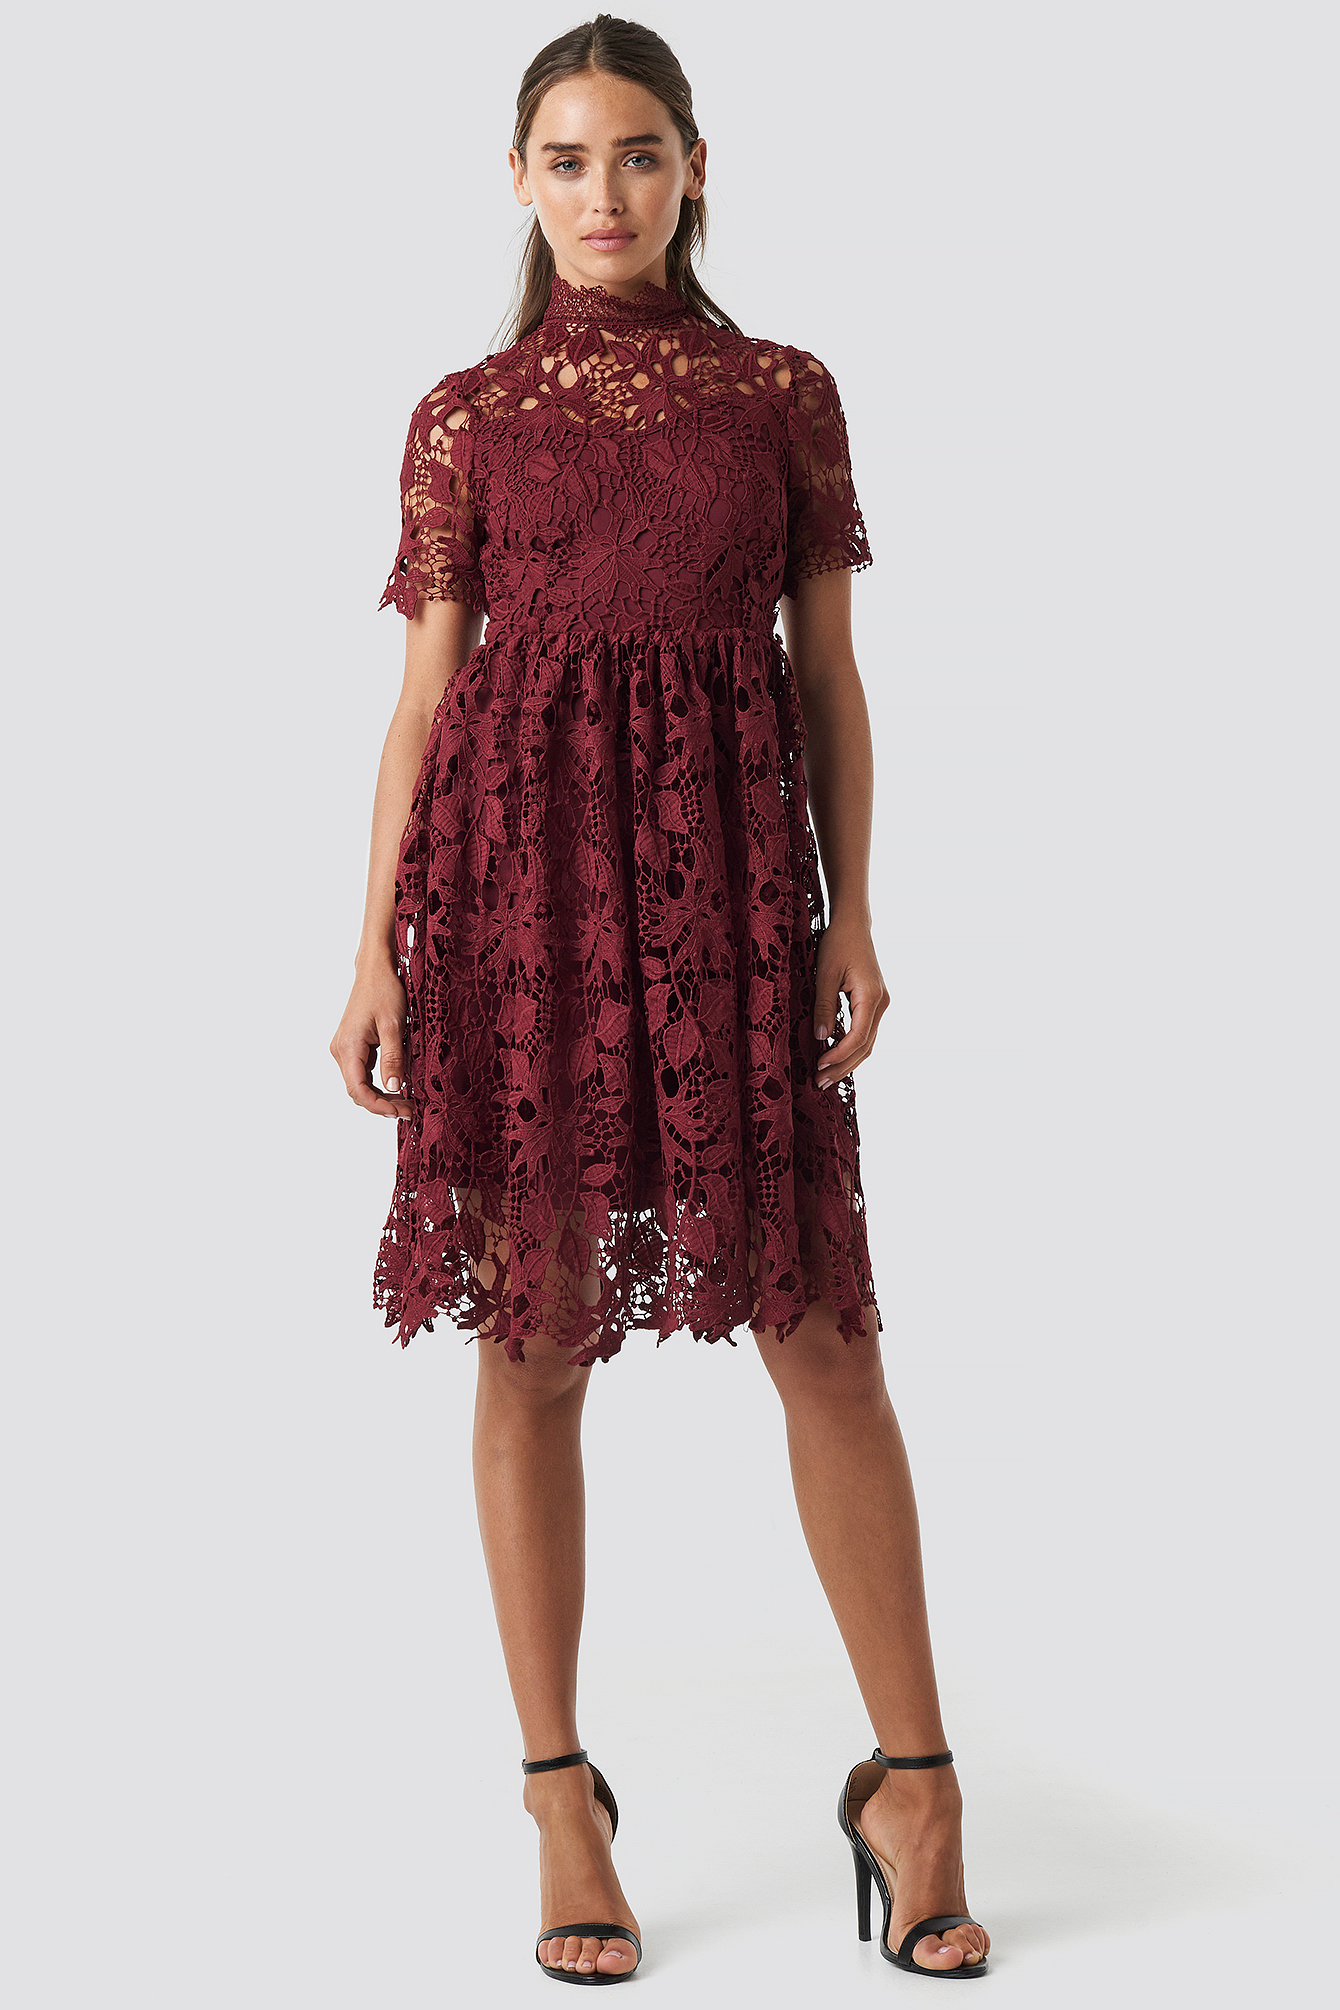 Rustic Red High Neck Short Sleeve Lace Dress